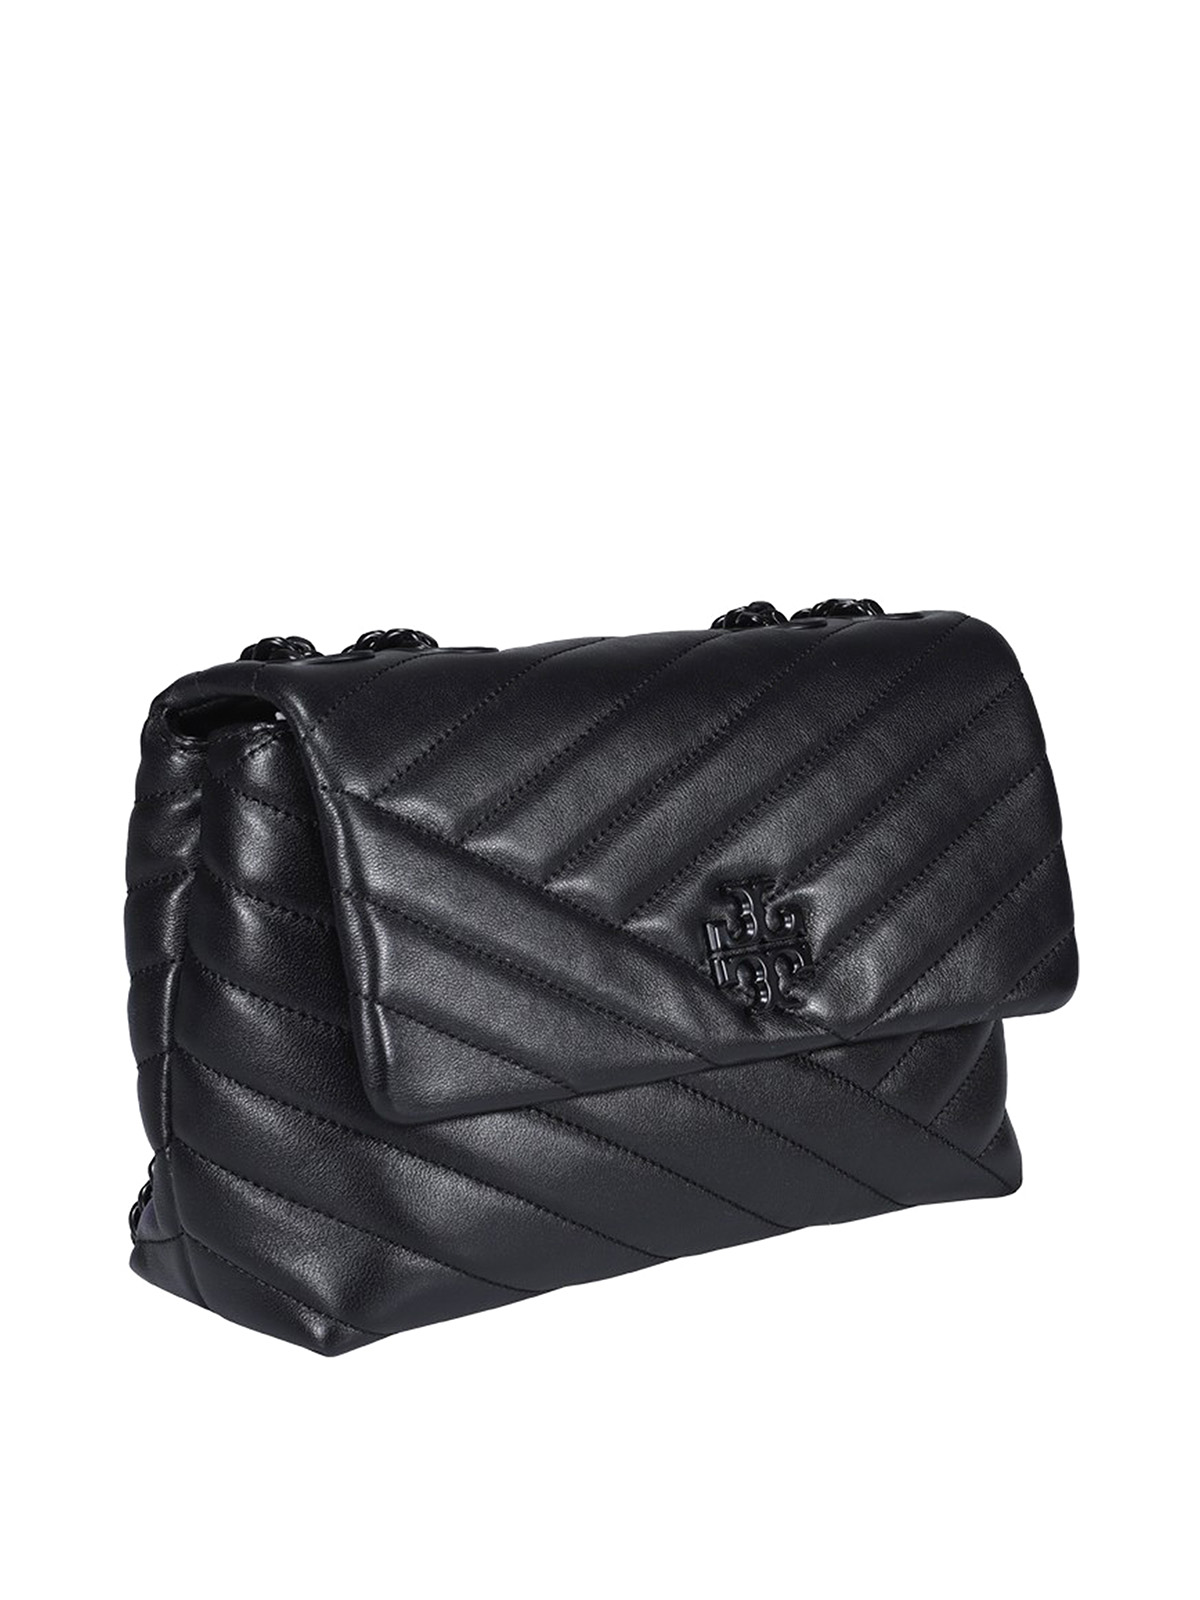 Cross body bags Tory Burch - Quilted leather bag - 82285001 